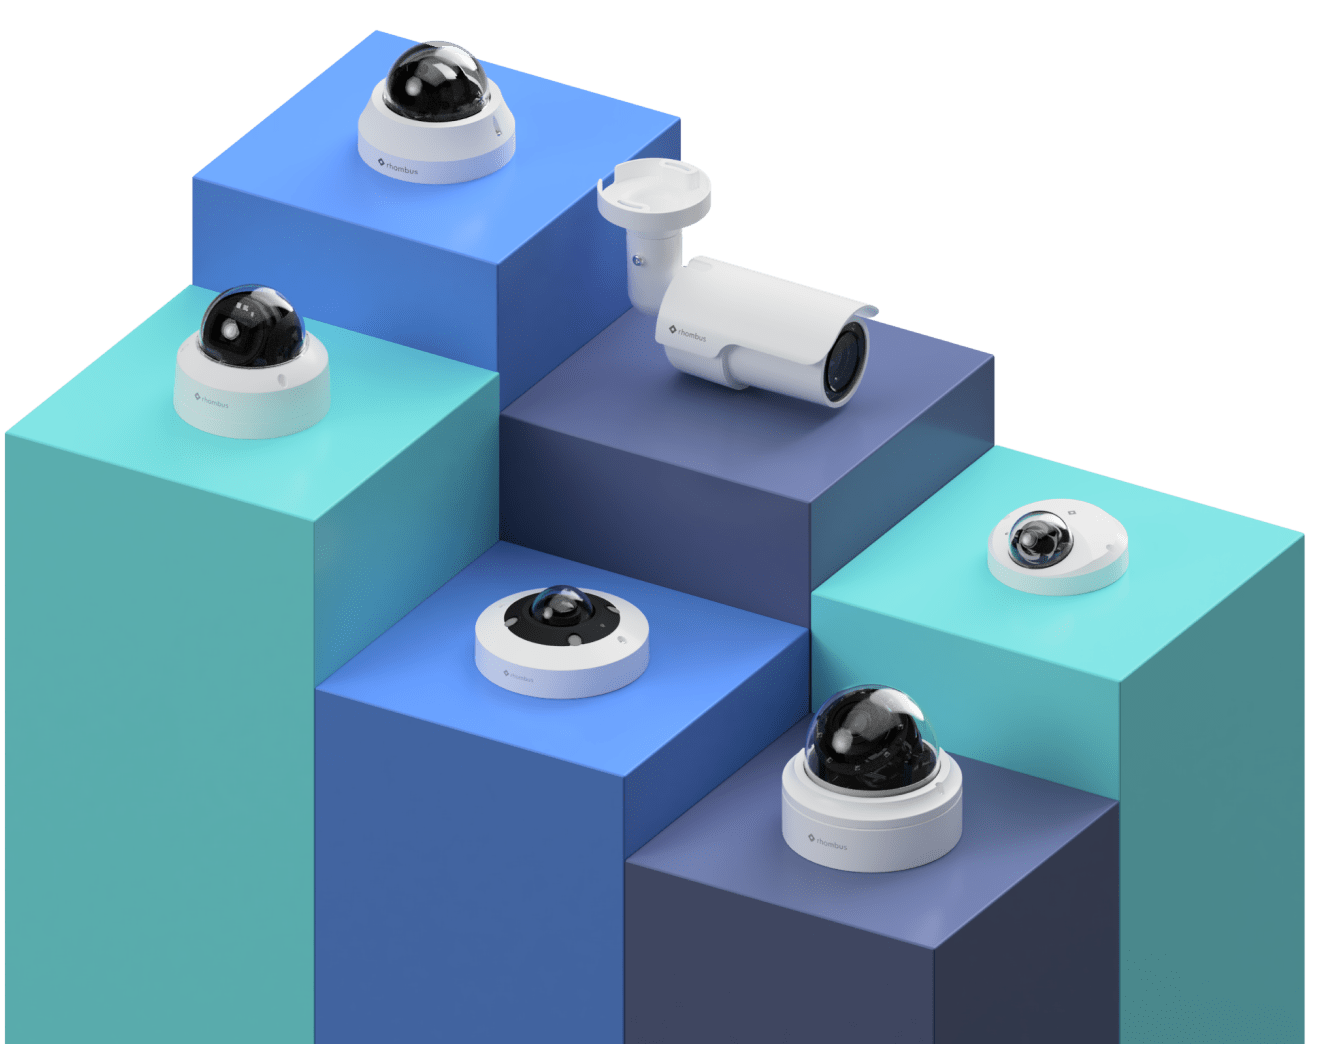 Secure Your Spaces with All-in-One Cloud Cameras